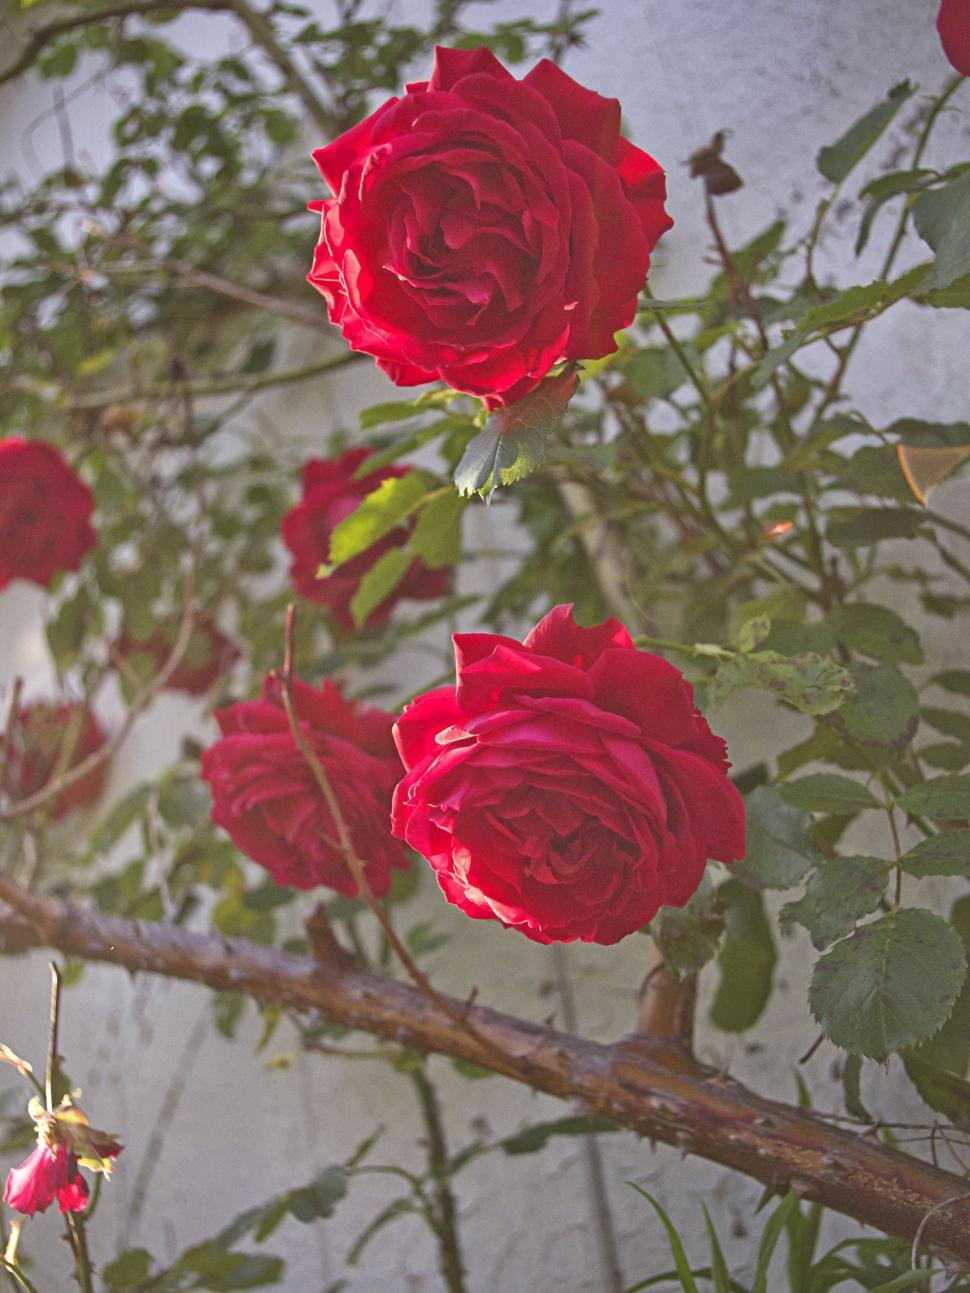 Free Image of Red Roses with stems 